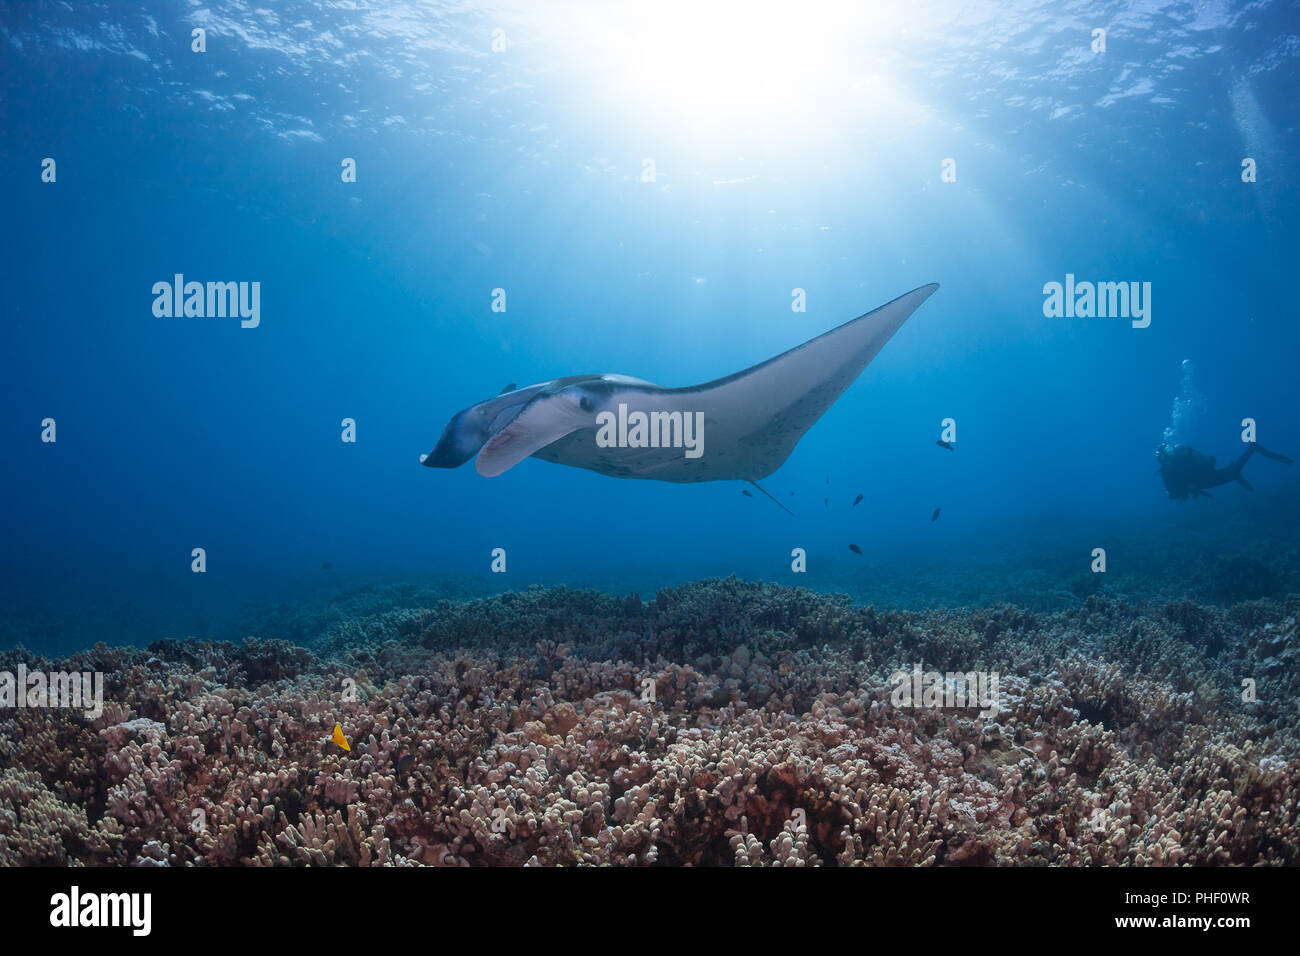 A diver observes a reef manta ray, Manta alfredi, gliding over a shallow coral reef off West Maui, Hawaii. Stock Photo